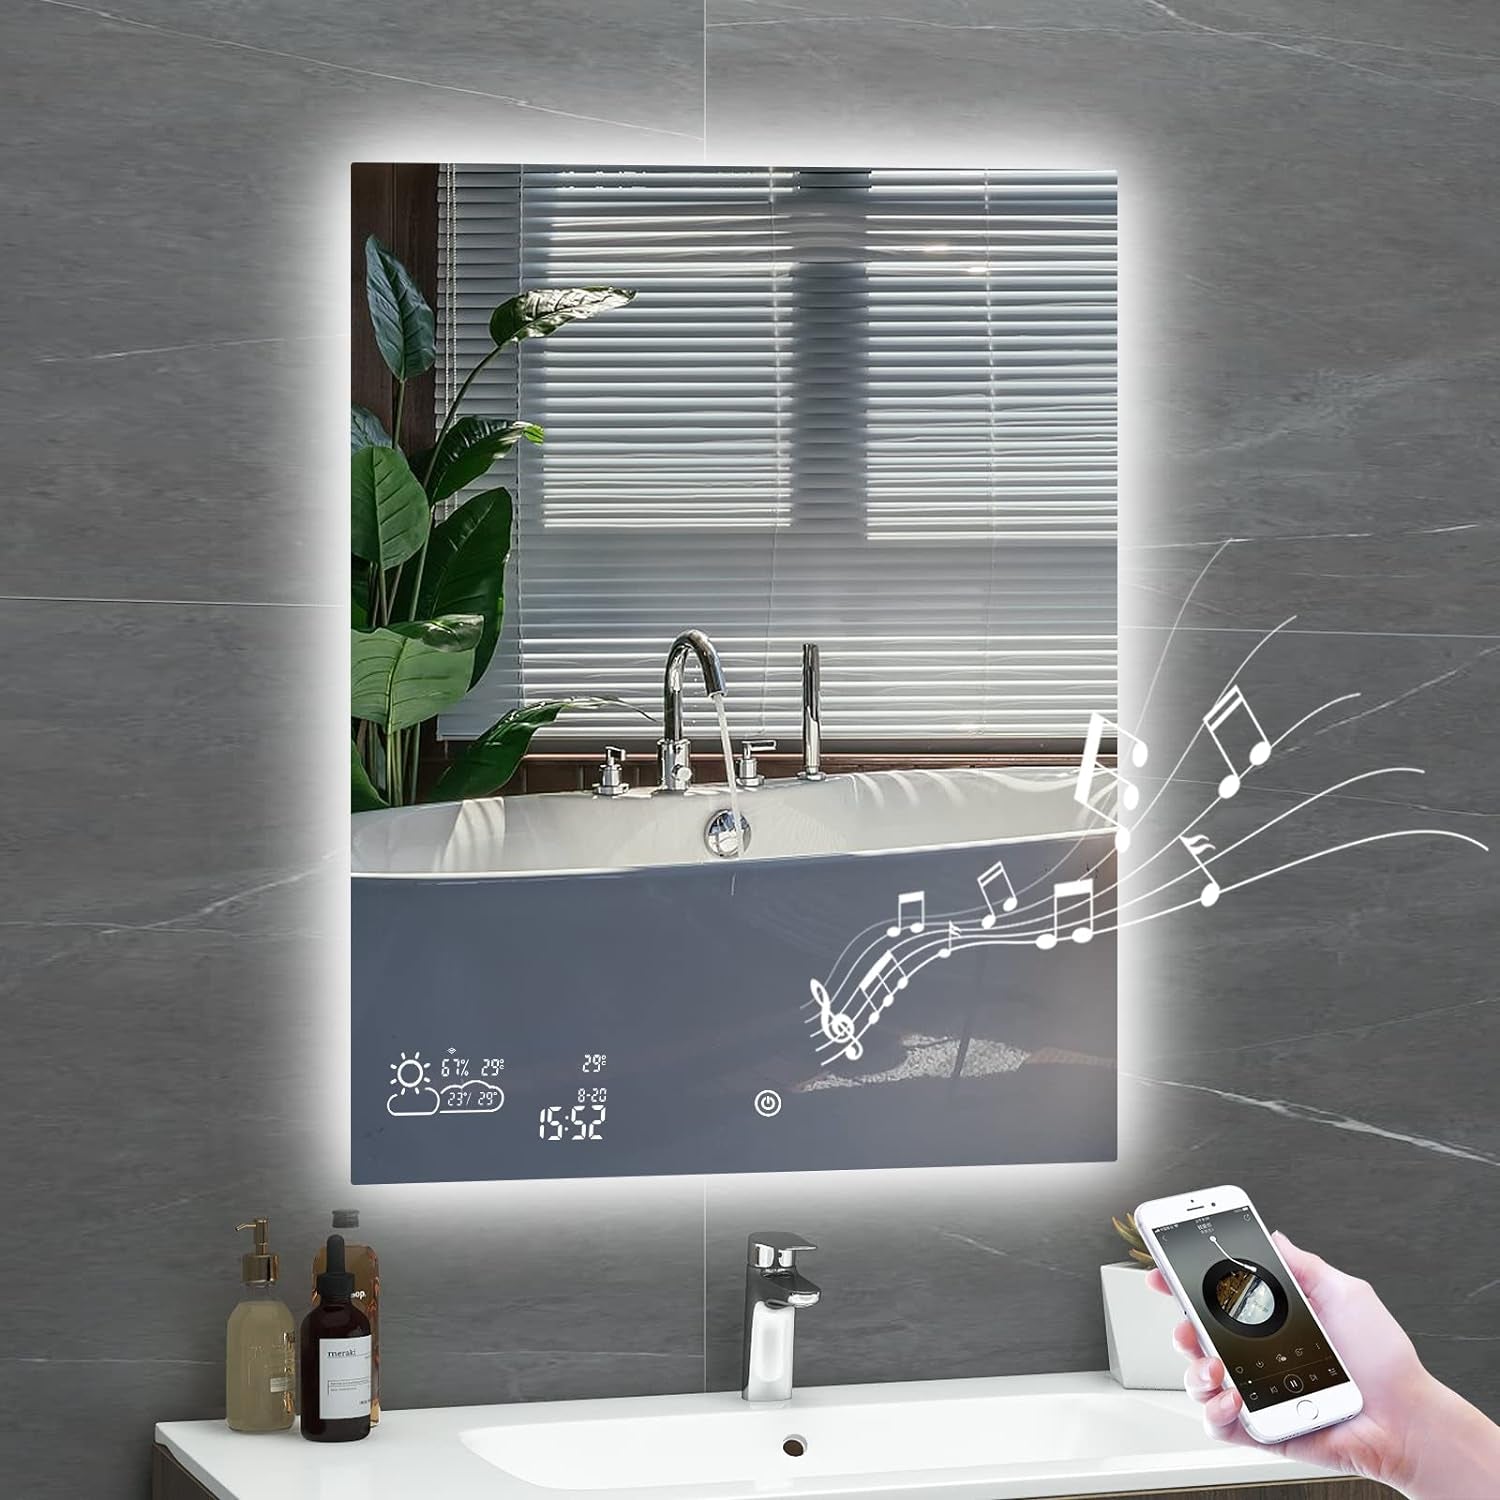 24” X 32” Smart Bathroom Mirror with Bluetooth Wi-Fi Enabled Weather Display, Fog Free, LED Light Vanity Mirror Backlit Frameless Lighted Touch Sensor Makeup for Wall - Vertically Hang Only